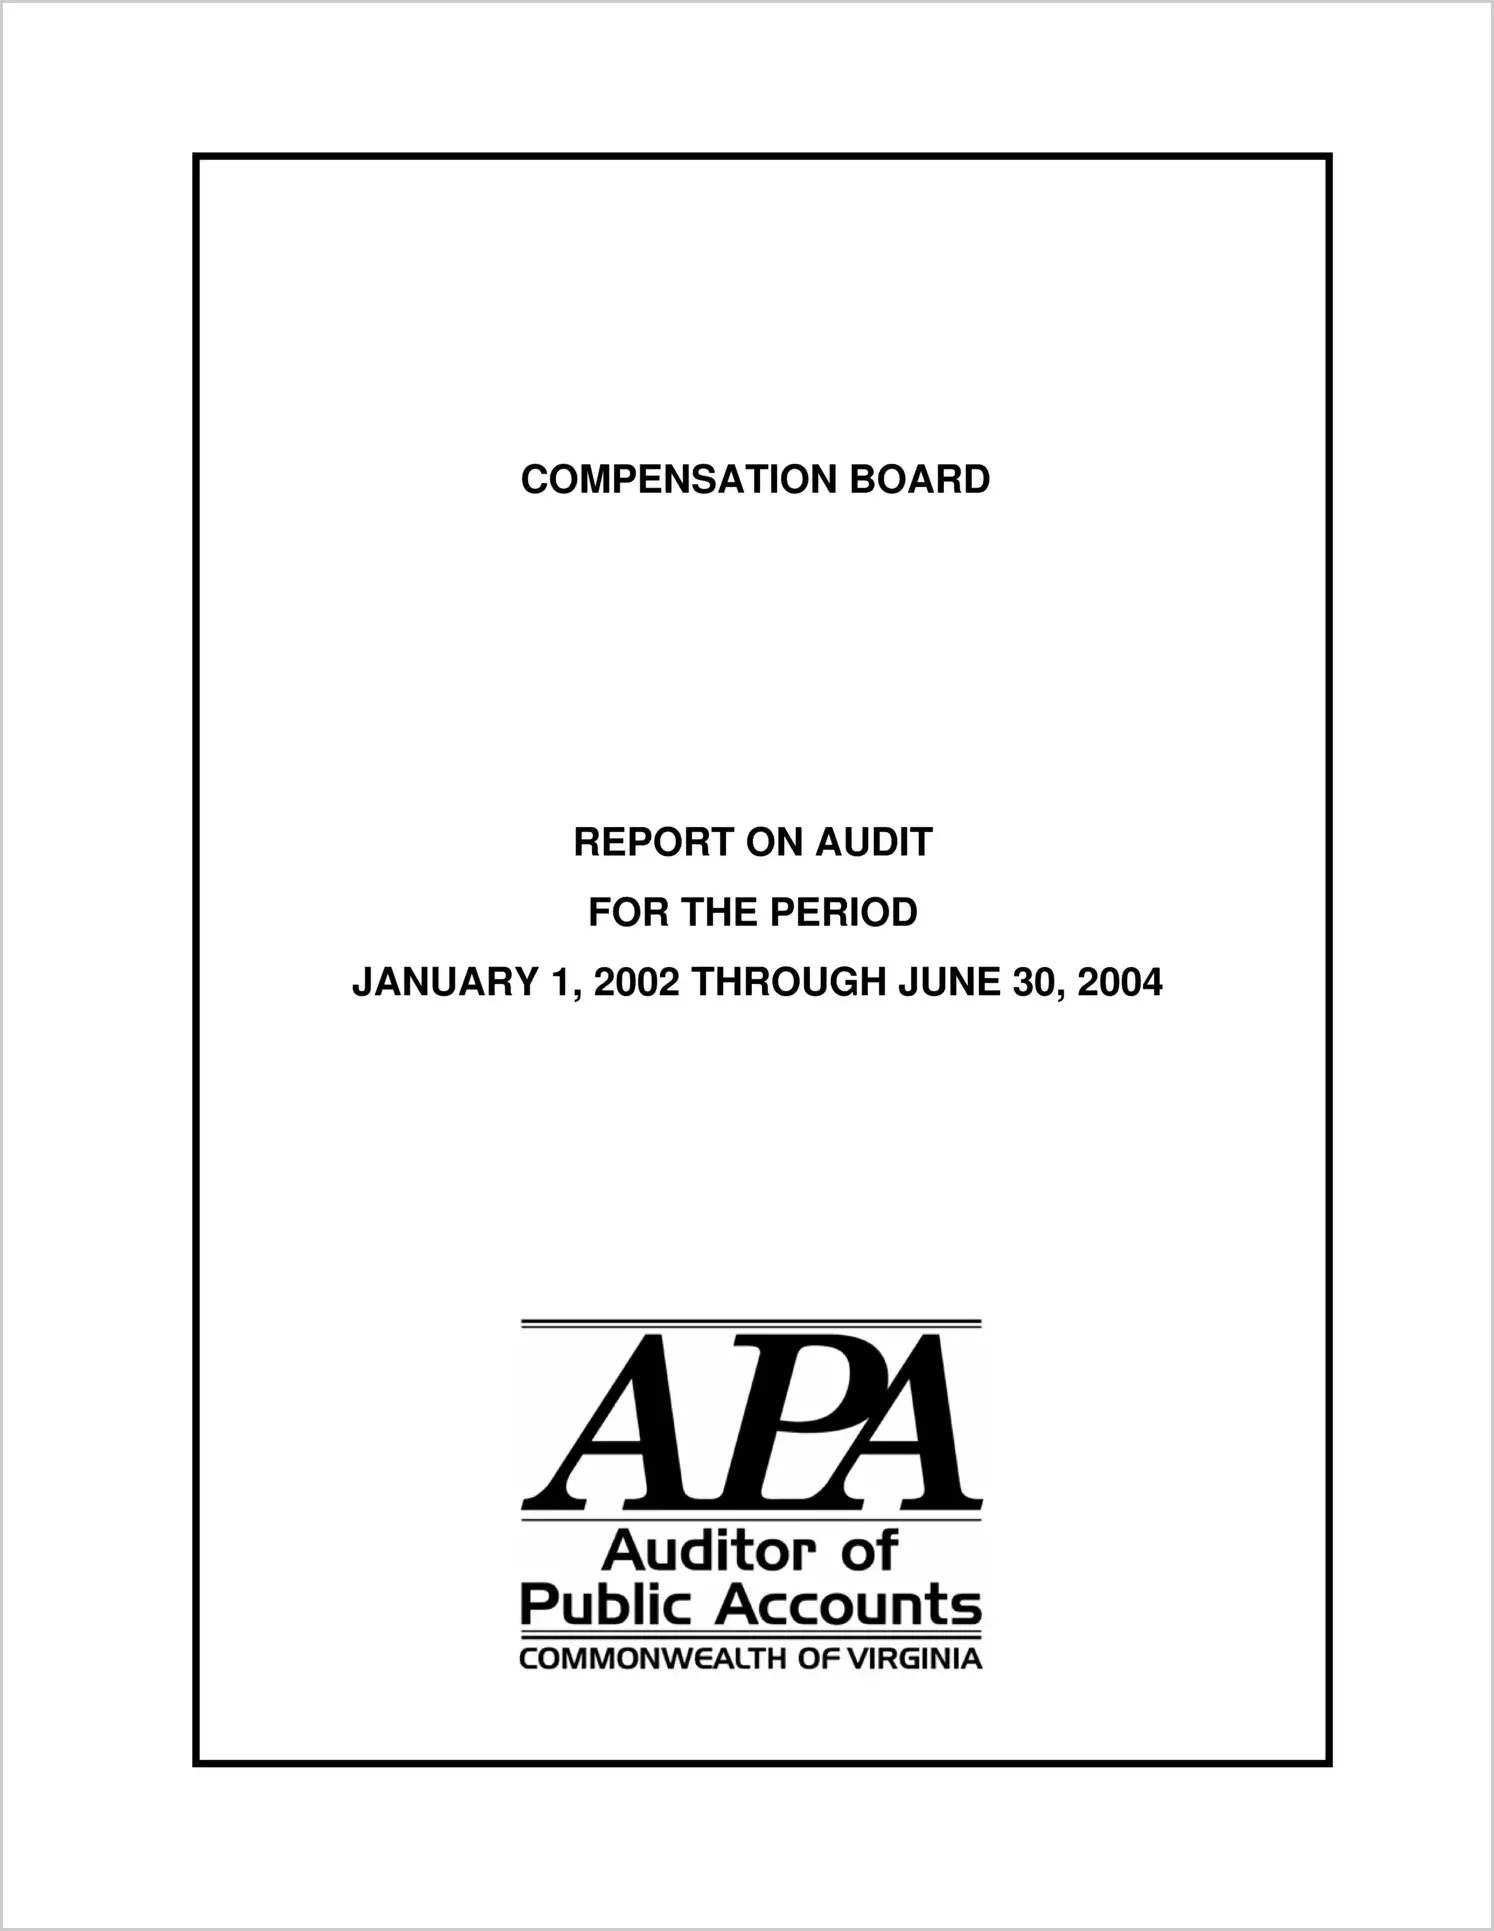 Compensation Board for the period January 1, 2002 through June 30, 2004